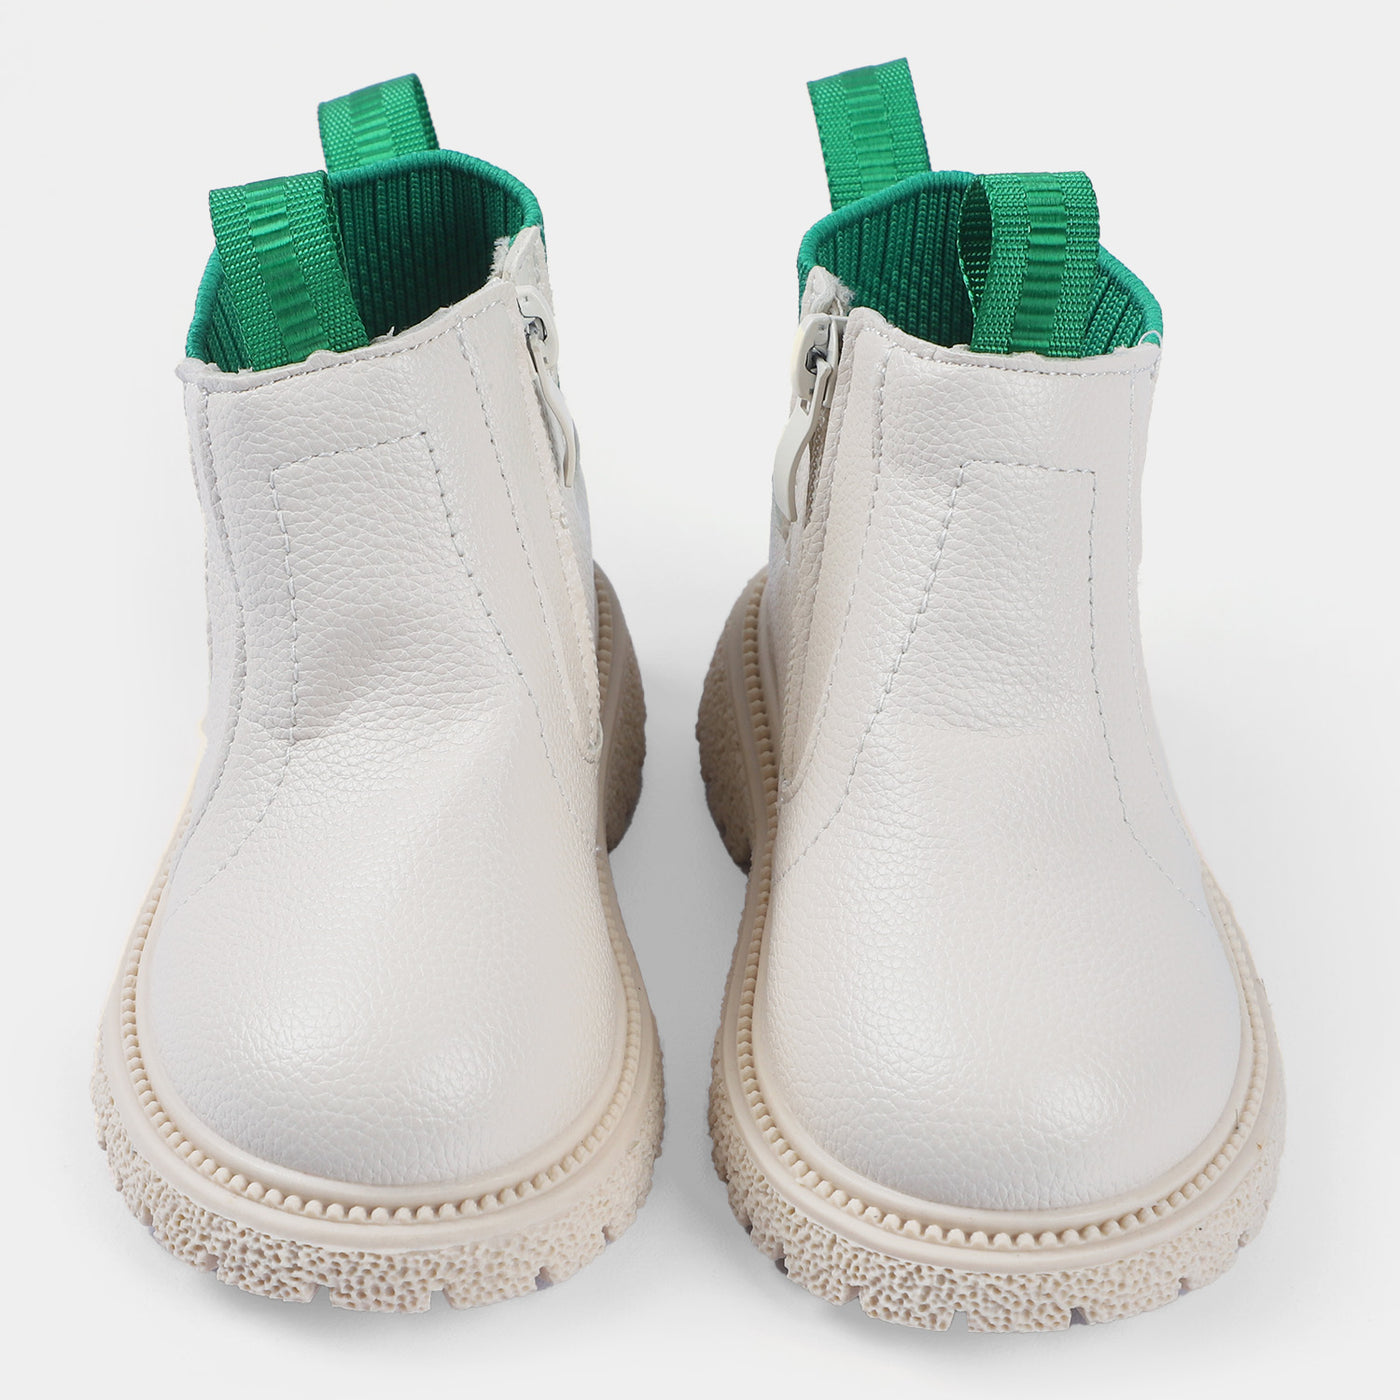 Boys Boots PS-09-White